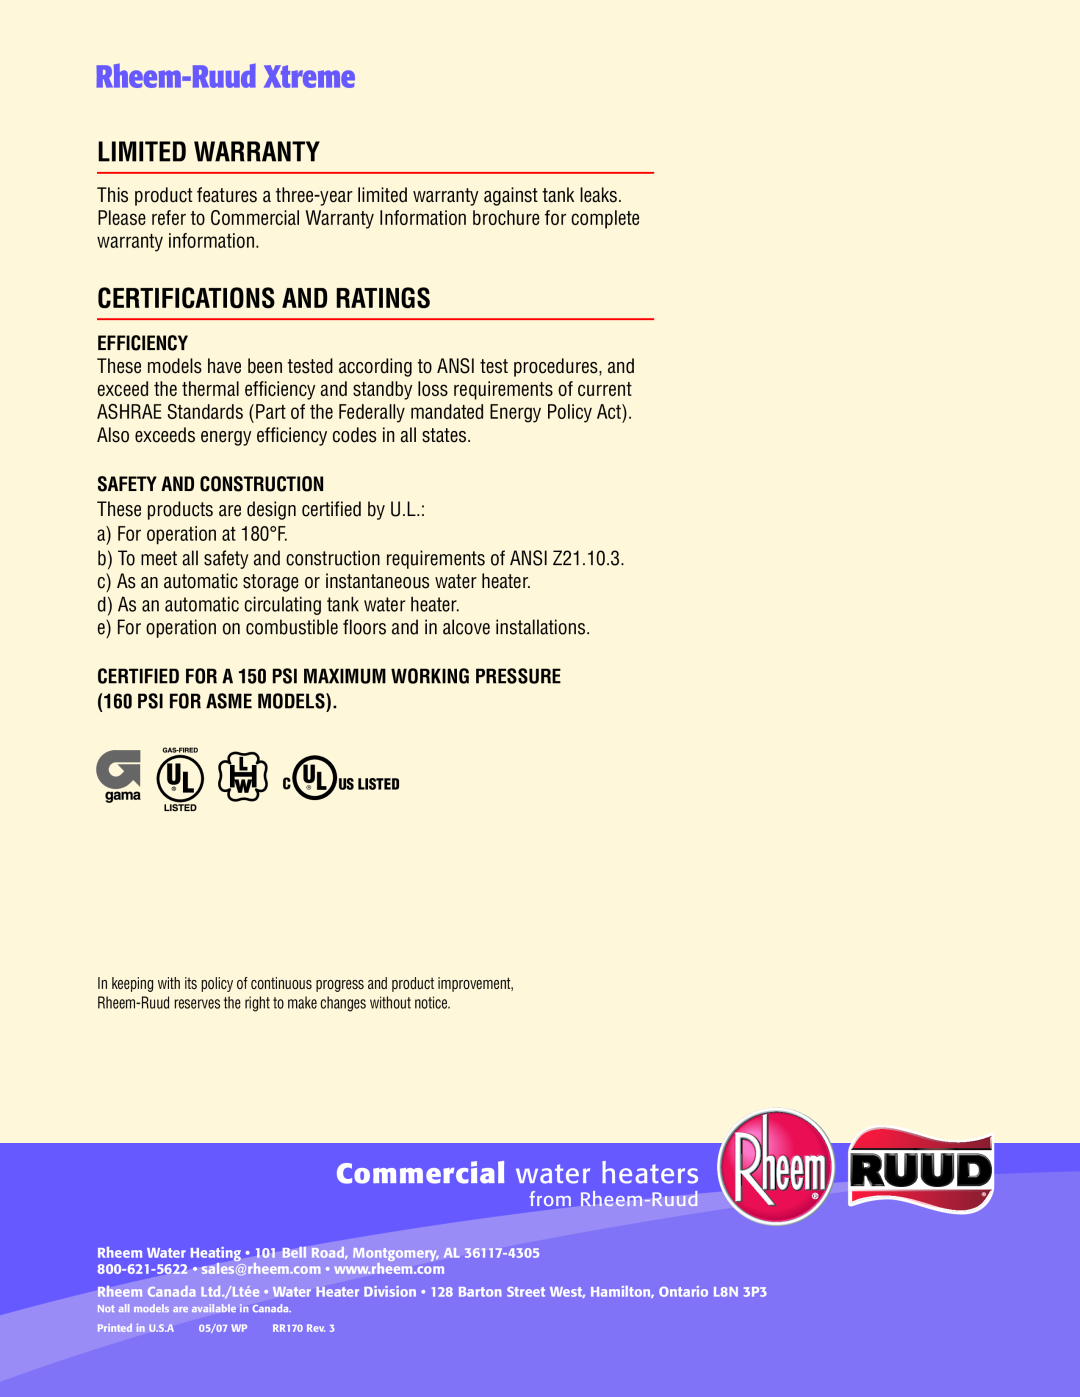 Rheem GX90-500 manual Rheem-Ruud Xtreme, Commercial water heaters, Limited Warranty, Certifications And Ratings, Efficiency 